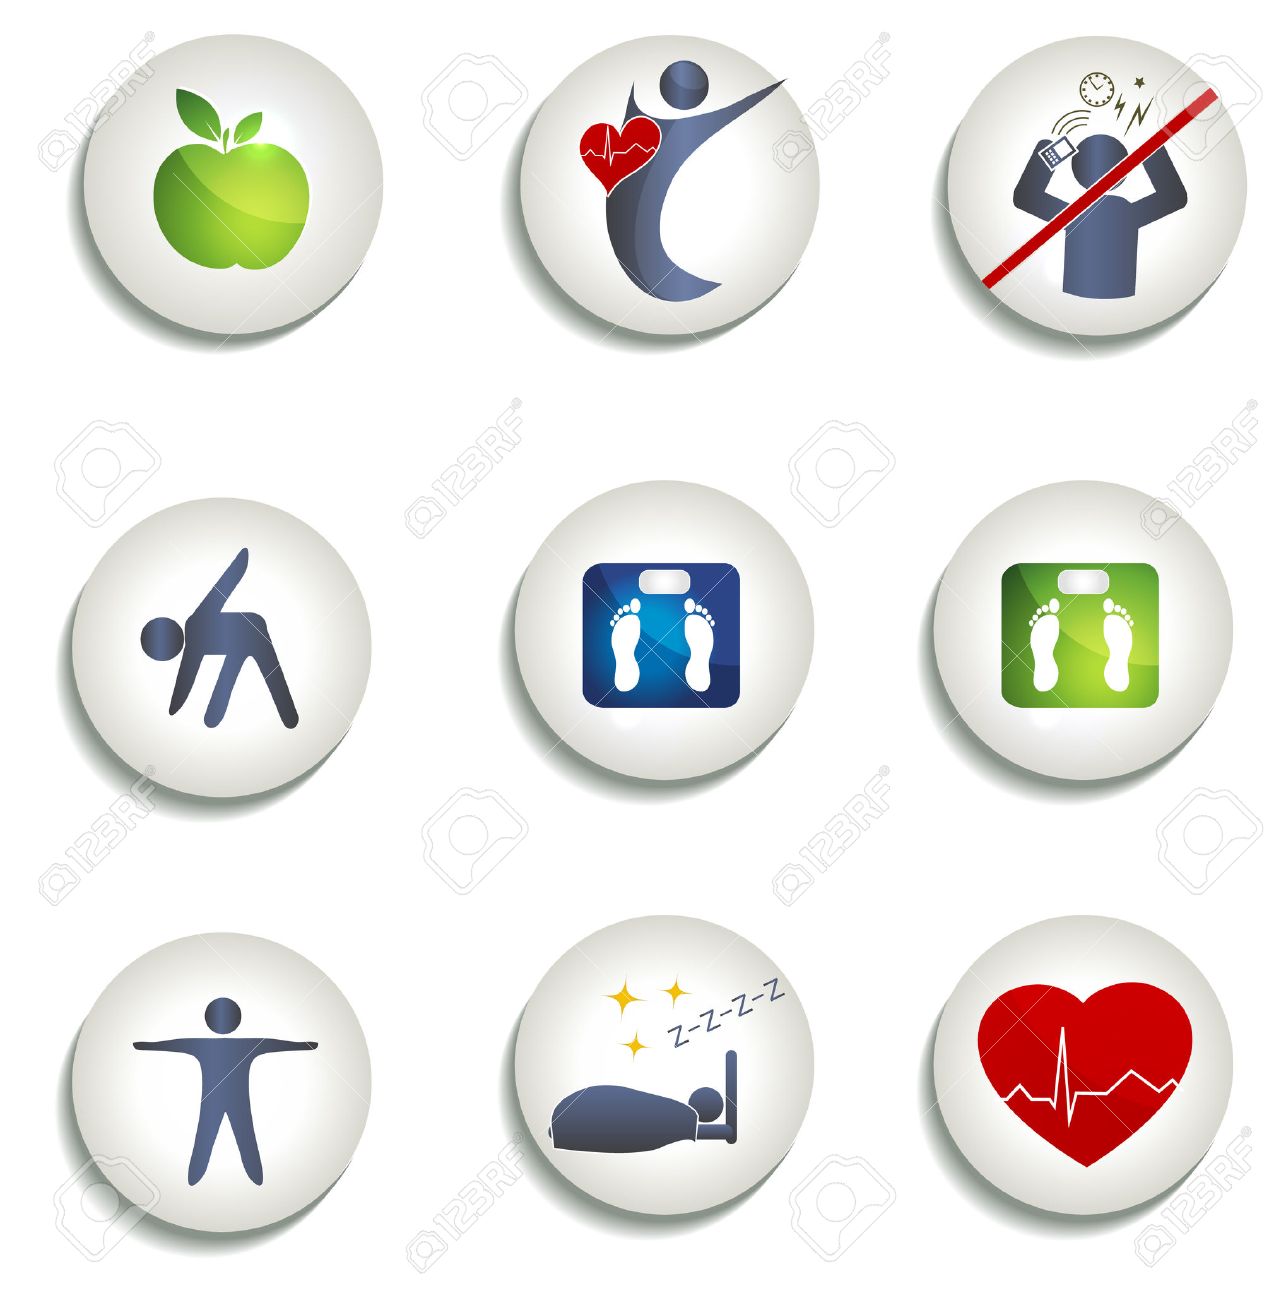 Healthy living icons Royalty Free Vector Image